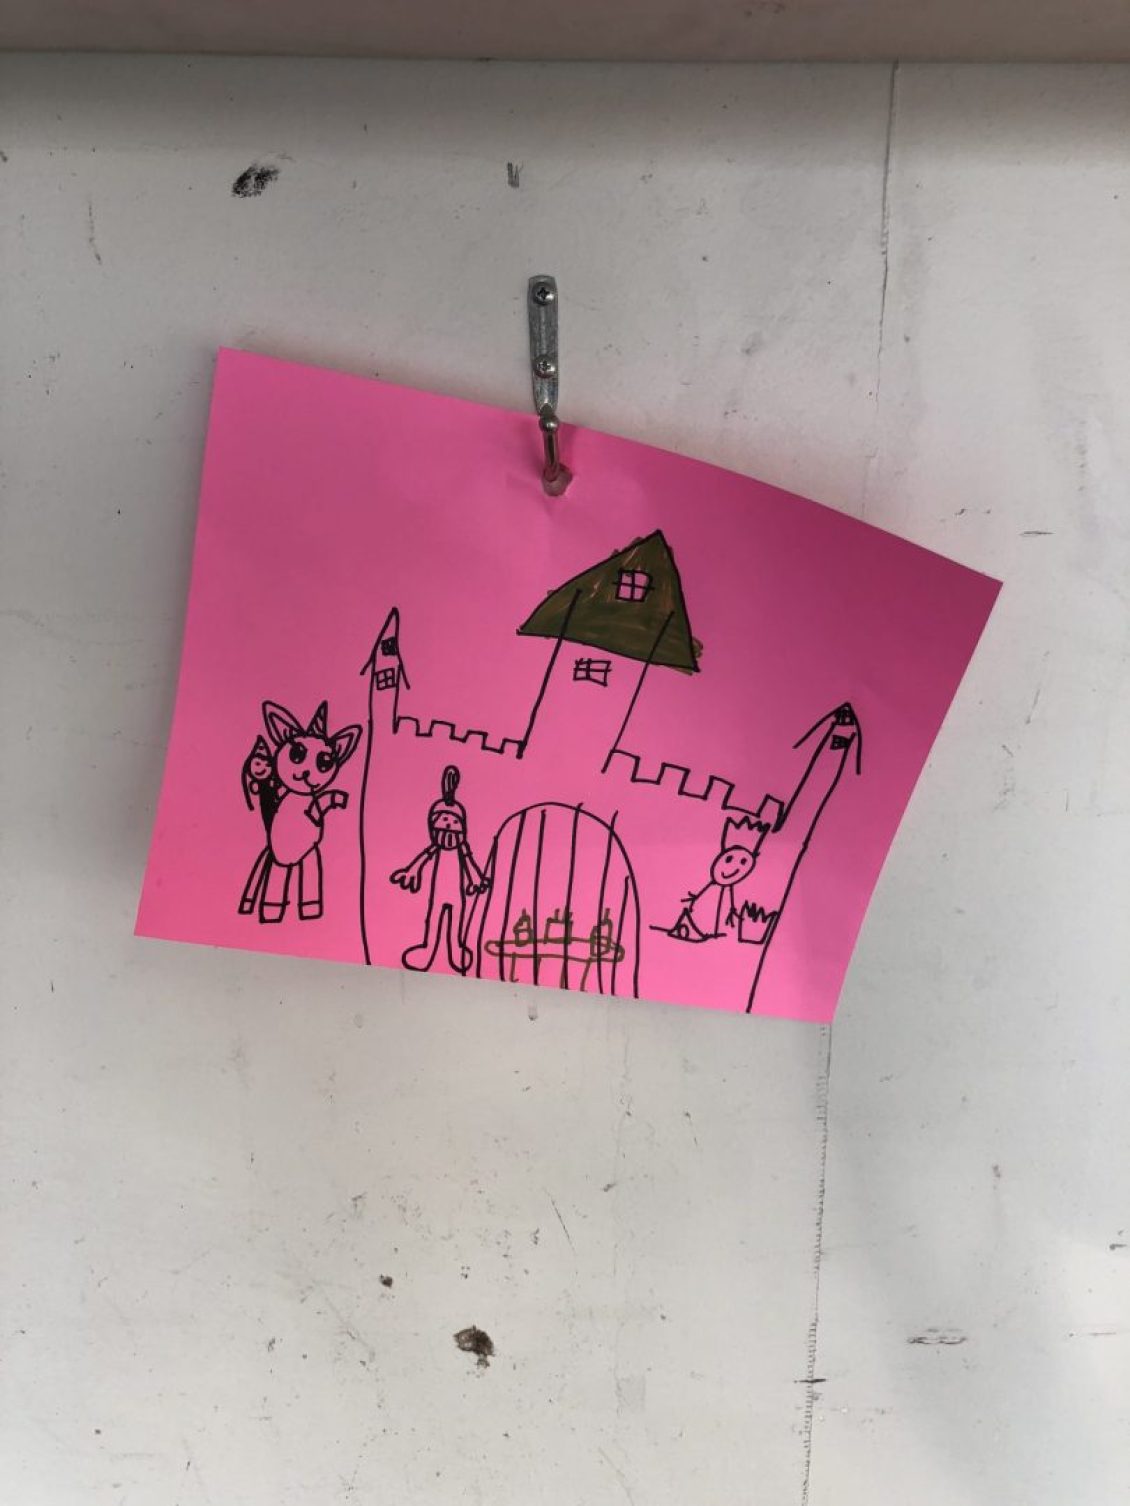 Drawing of a castle done by a child